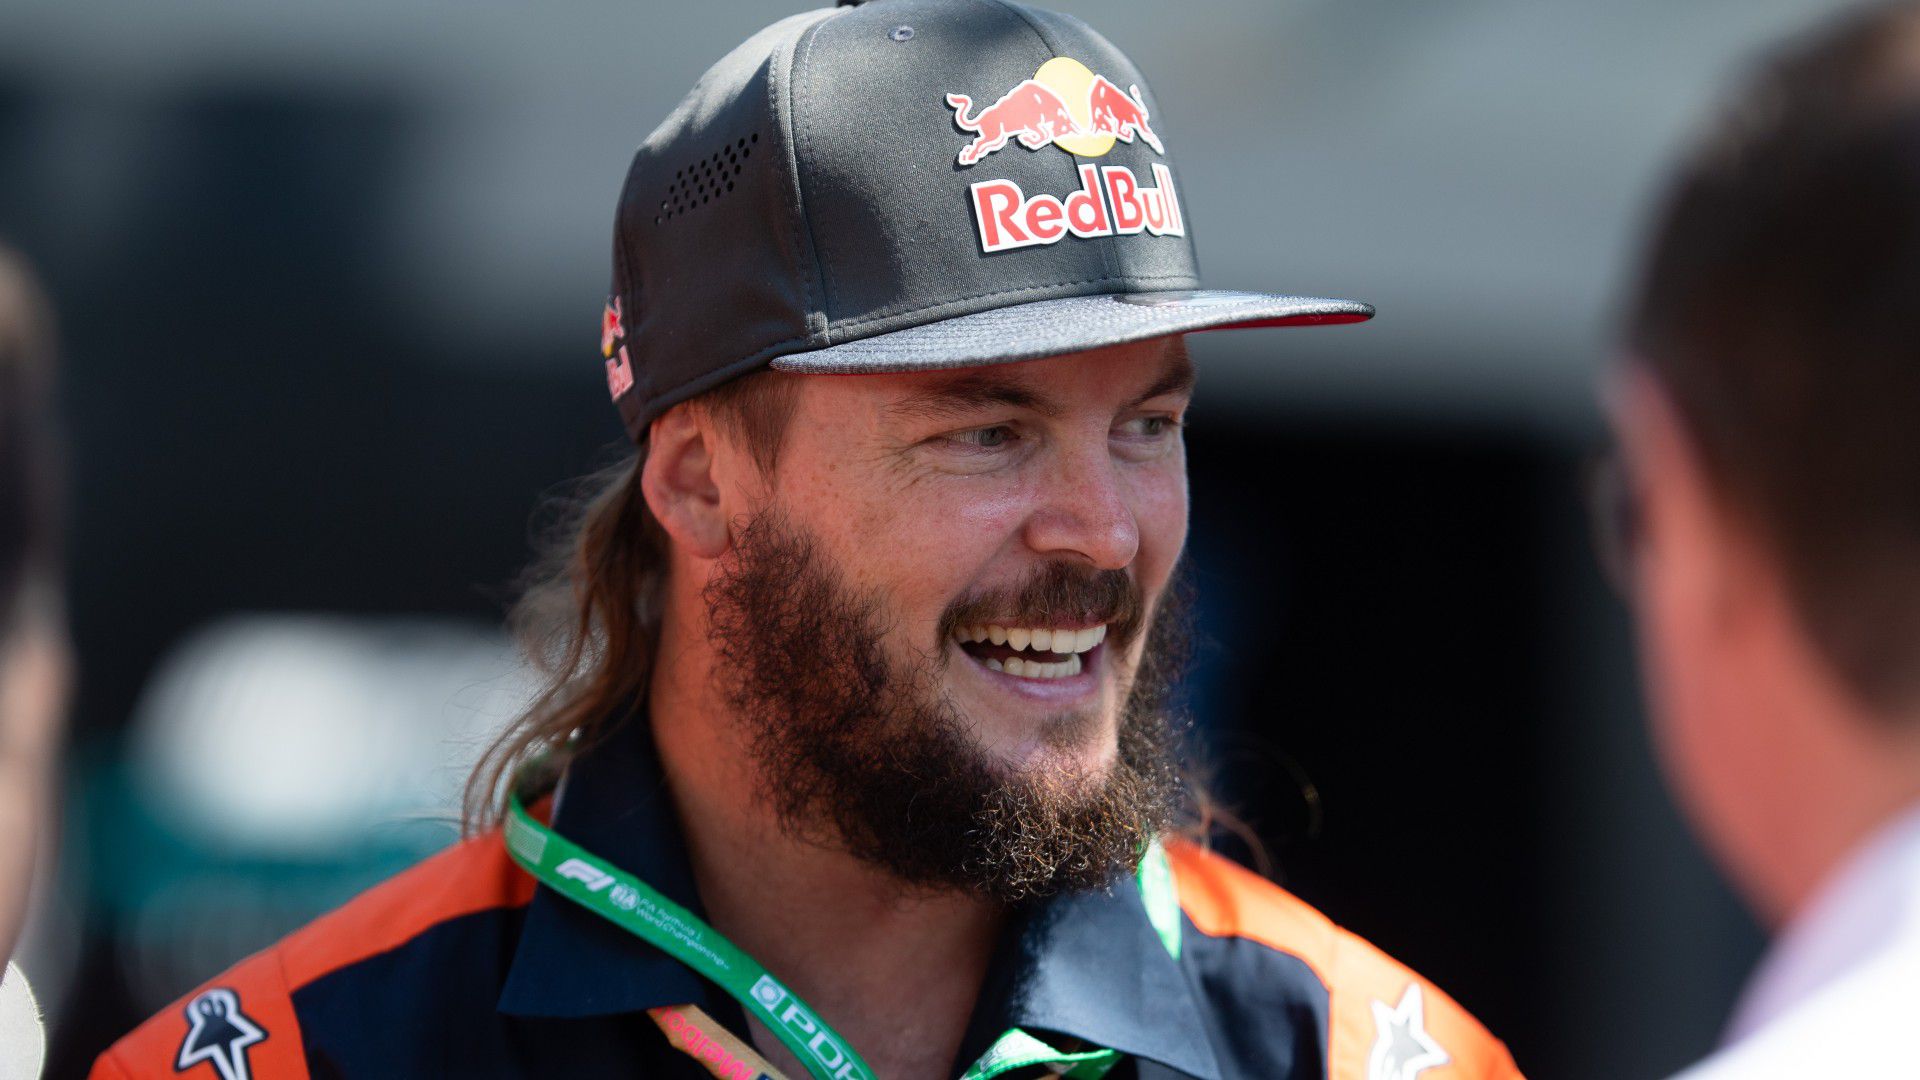 Toby Price chasing third Dakar Rally title after brutal injury in 2021